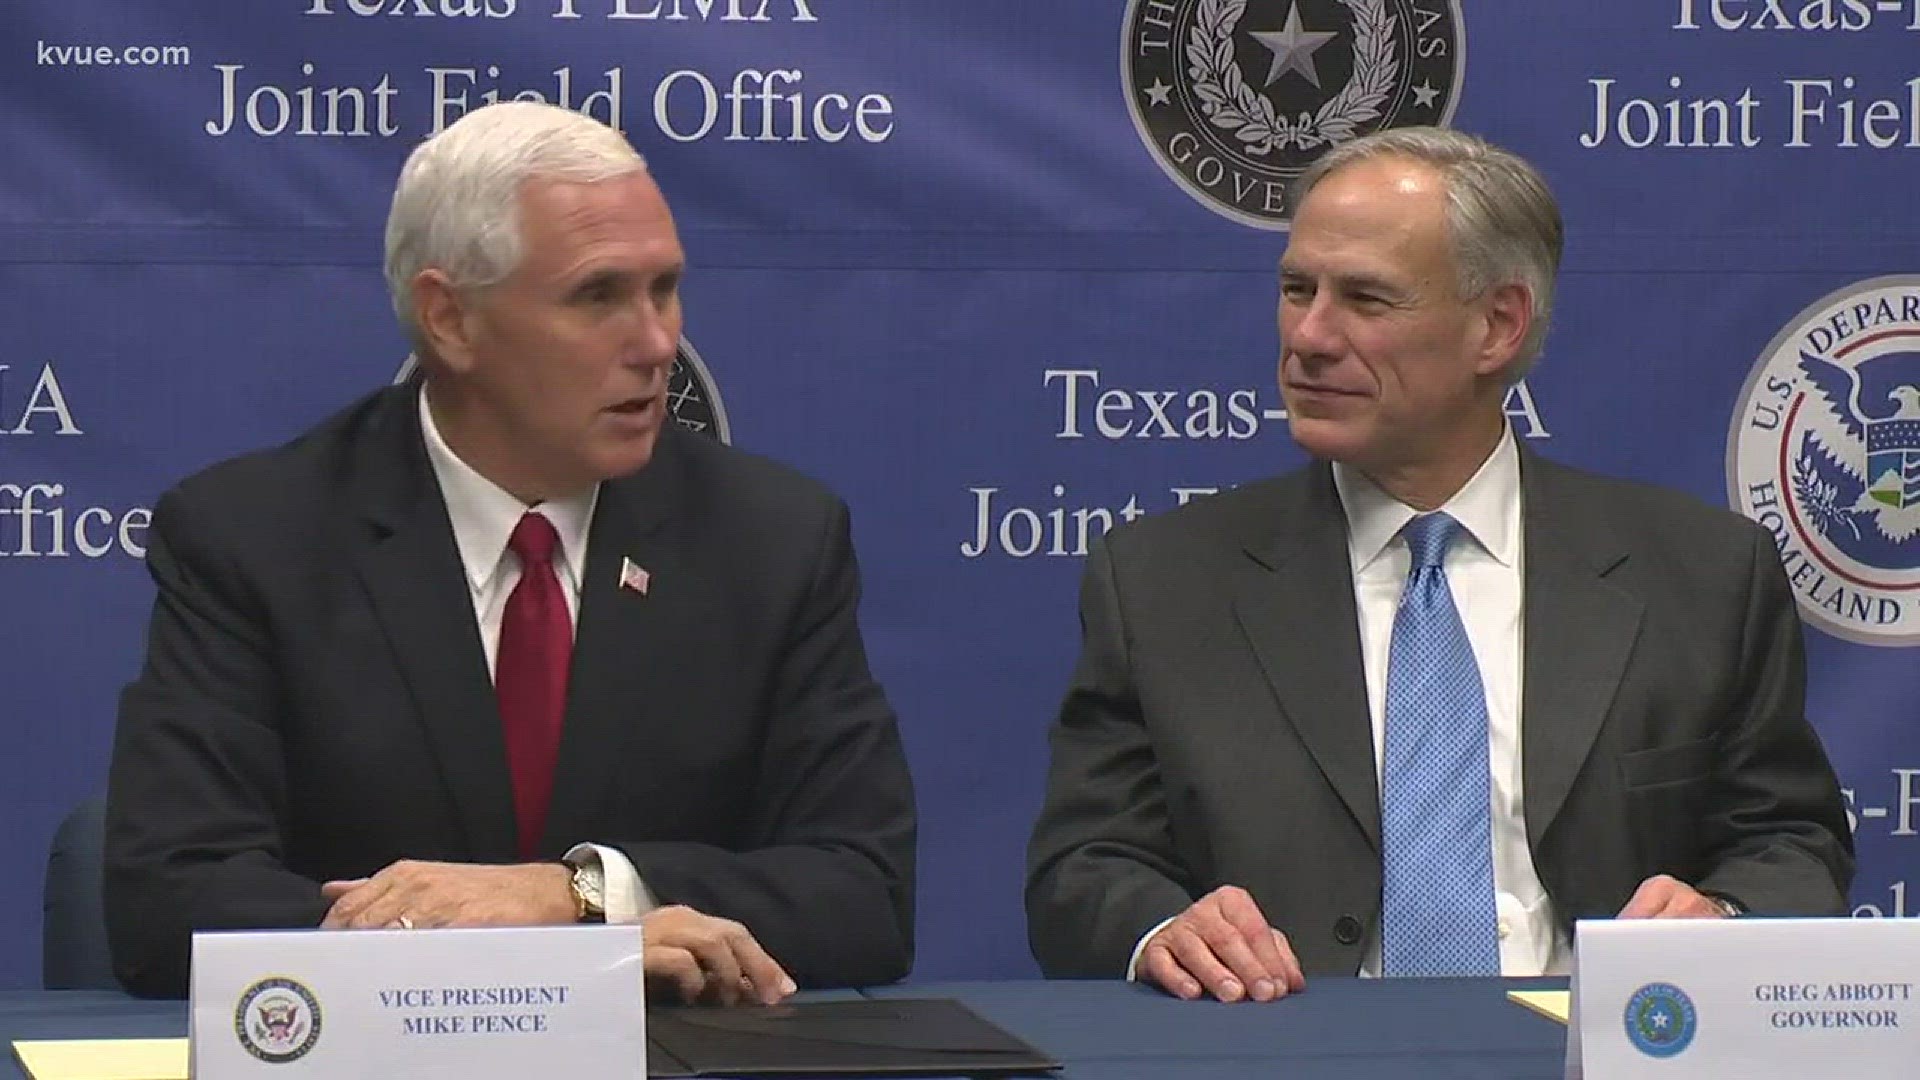 Before speaking at the convention, Vice President Pence met with Gov. Greg Abbott and Energy Secretary Rick Perry for an update on Hurricane Harvey recovery efforts.